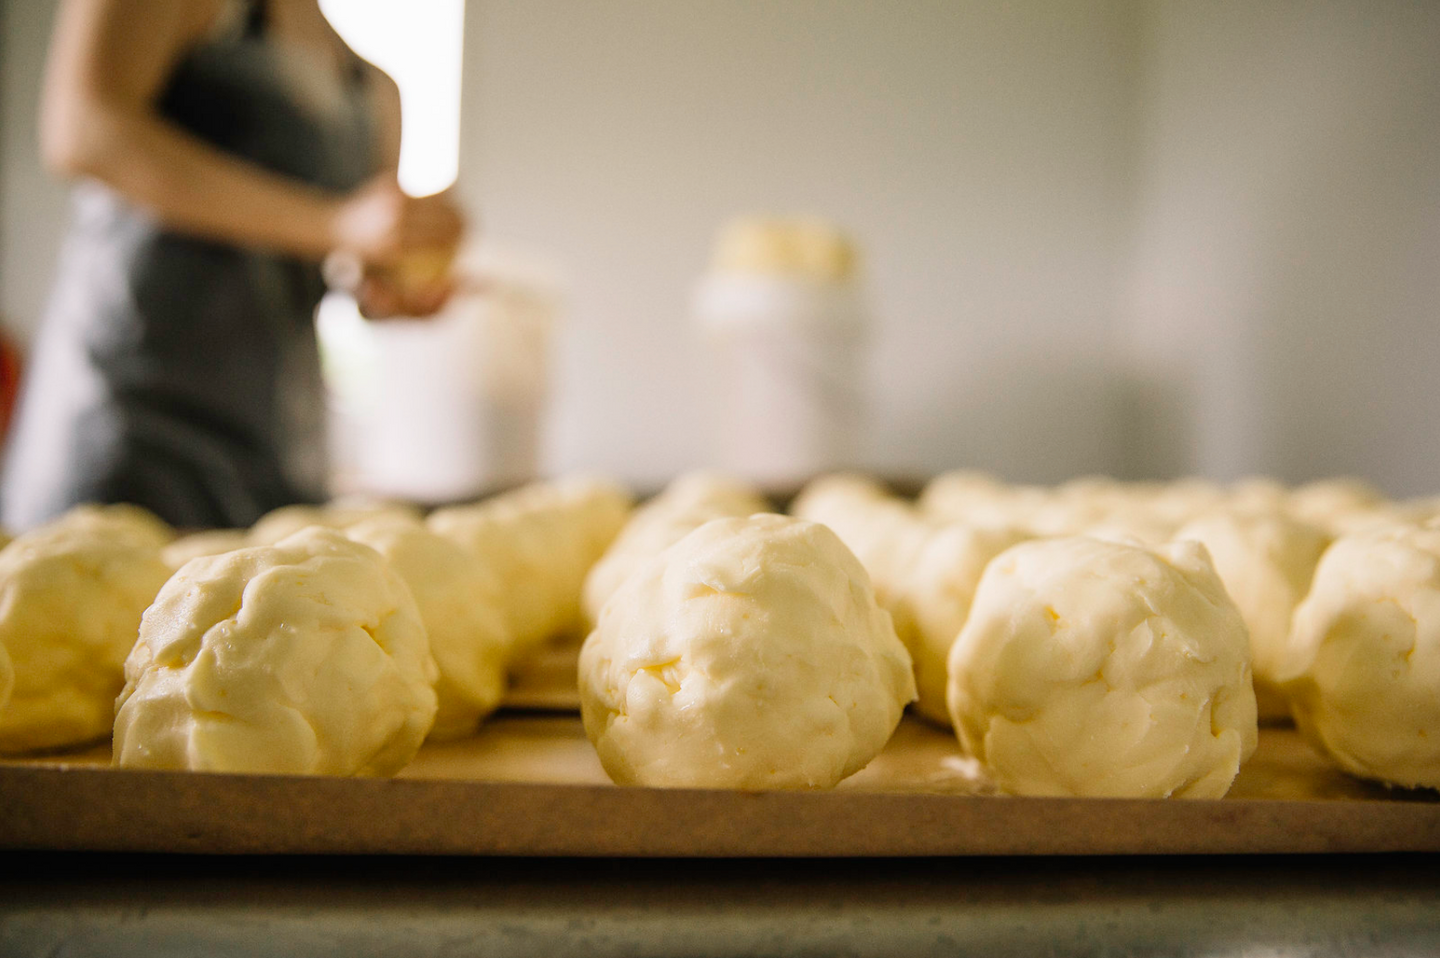 Ploughgate Creamery, crafting small-batch, cultured butter by hand